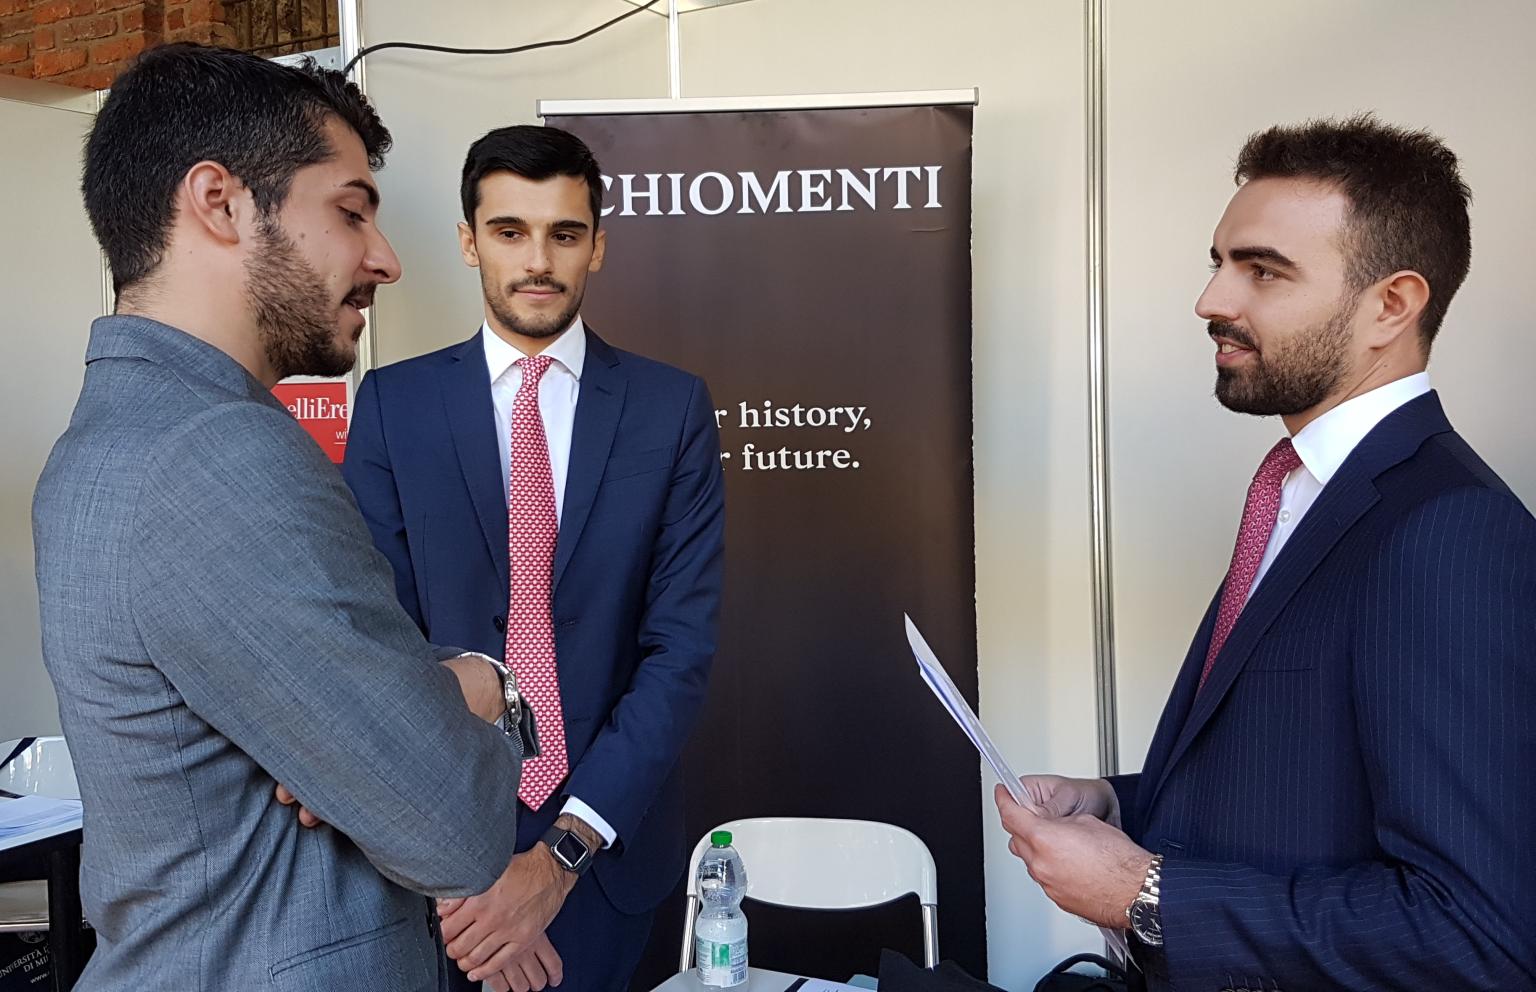 Chiomenti participates to the Catholic University of the Sacred Heart’s Career Day held on October 8th, 2019 (10am-5pm).